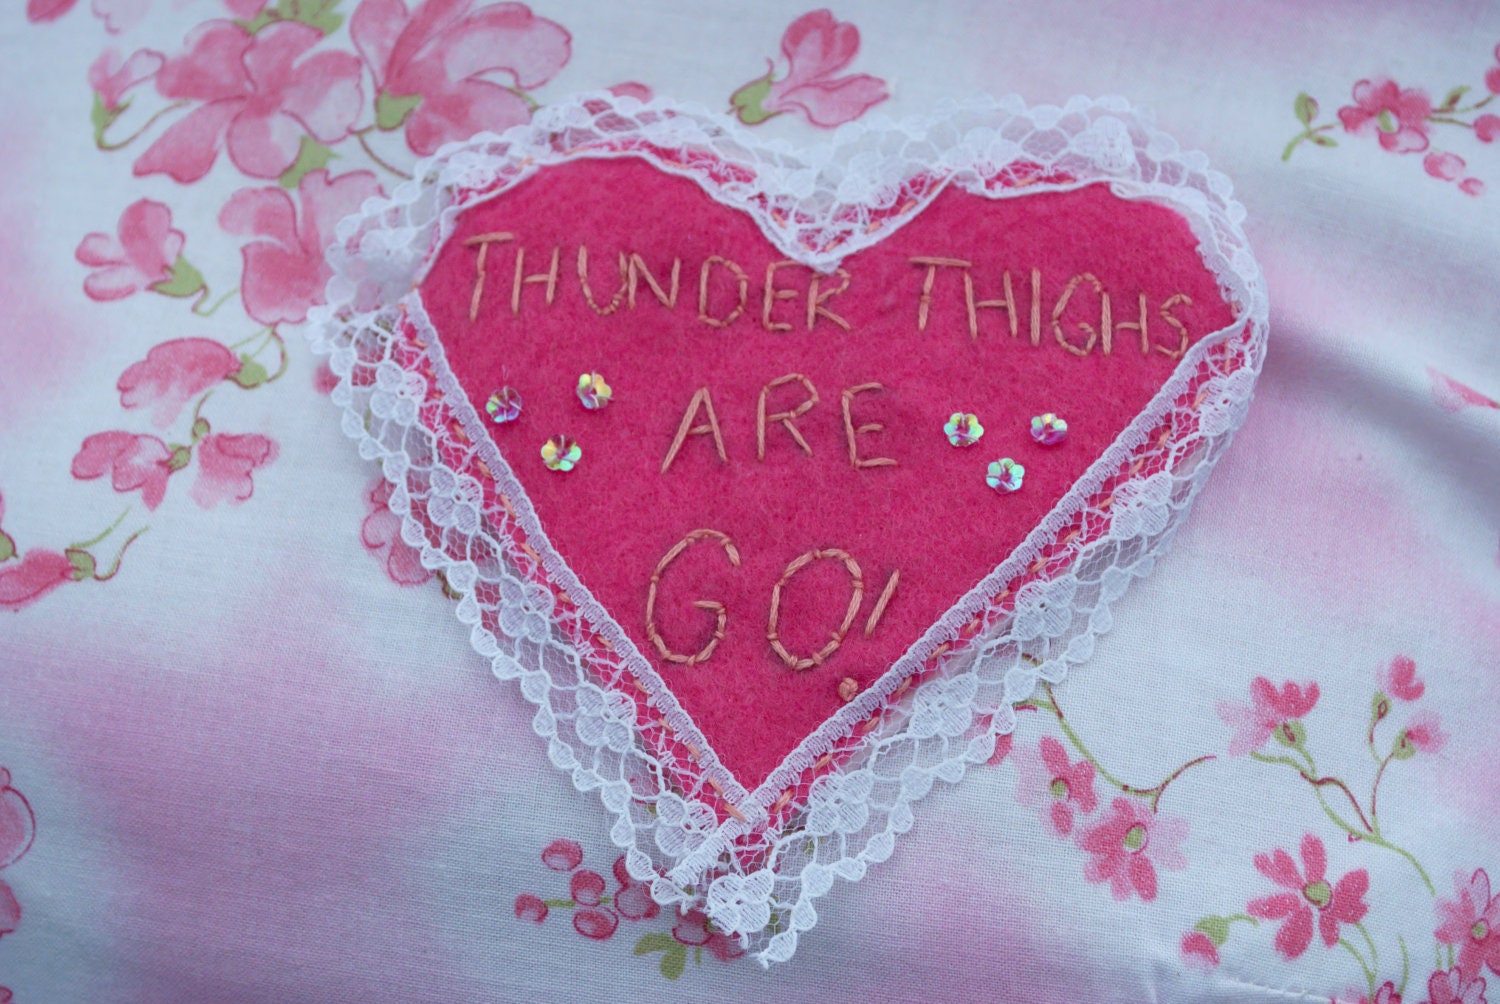 Thunder Thighs Are Go - Lace Heart Shaped Embroidered Felt Brooch